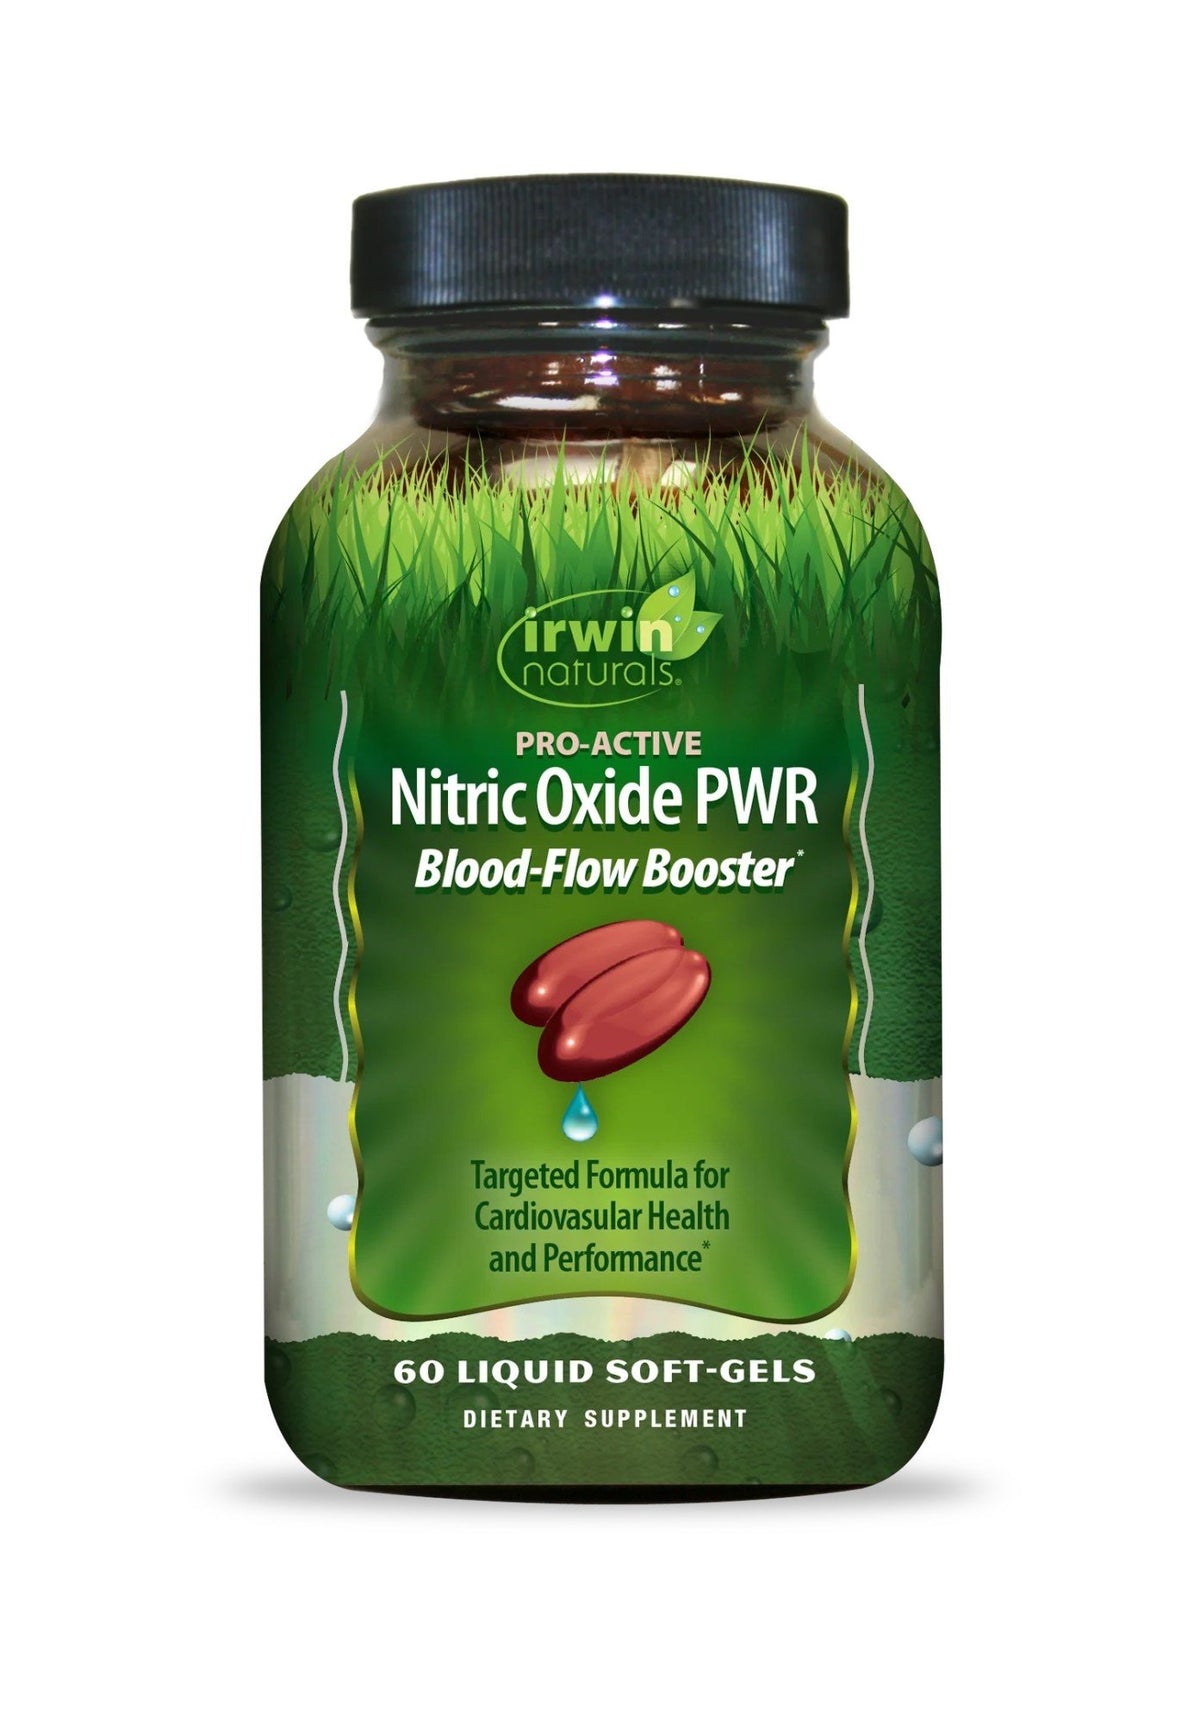 Irwin Naturals Pro-Active Nitric Oxide PWR Blood-Flow Booster 60 Capsule